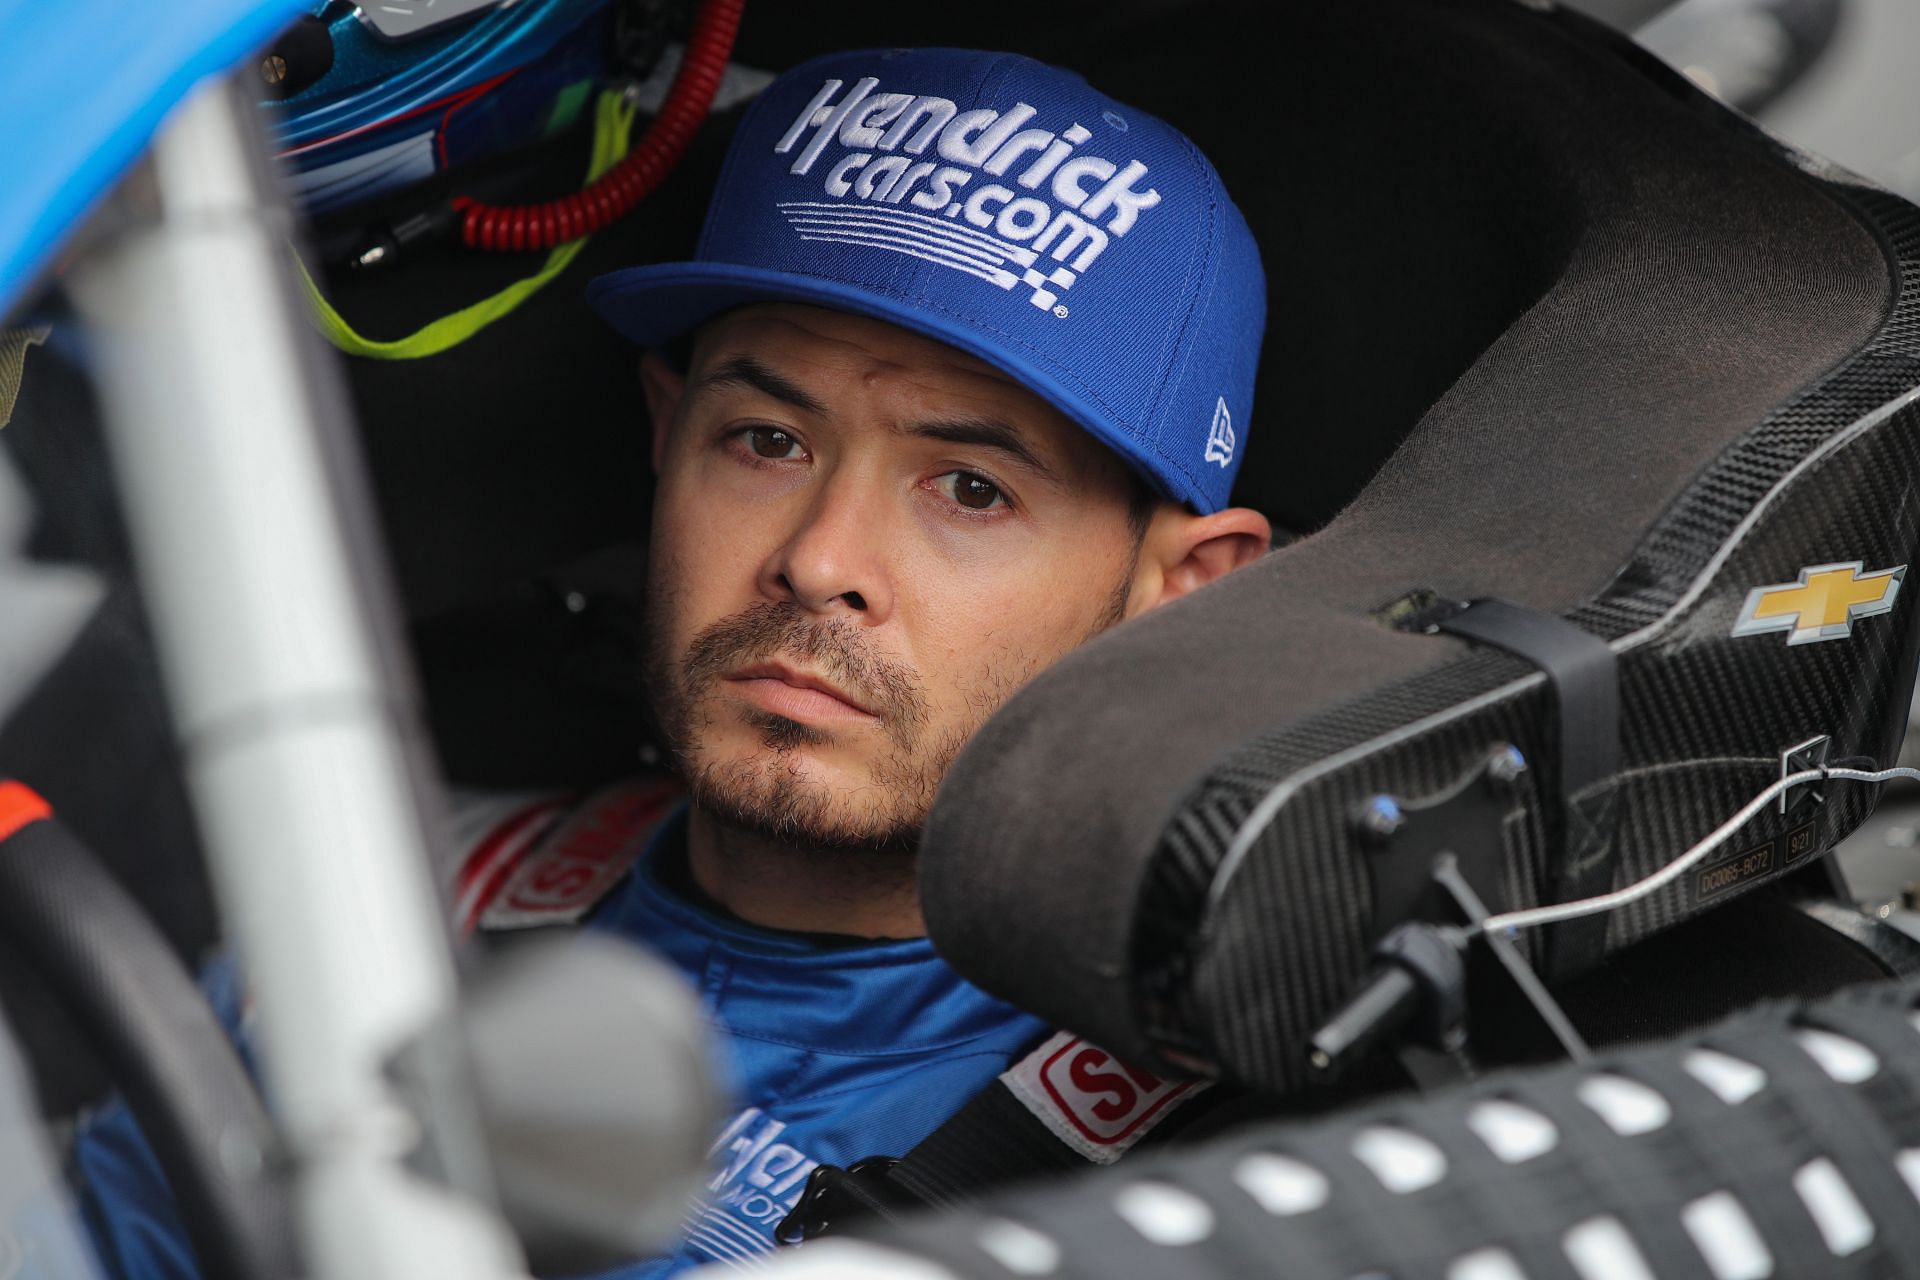 Kyle Larson during qualifying for the 2022 NASCAR Cup Series Blue-Emu Maximum Pain Relief 400 at Martinsville Speedway in Virginia. (Photo by Meg Oliphant/Getty Images)